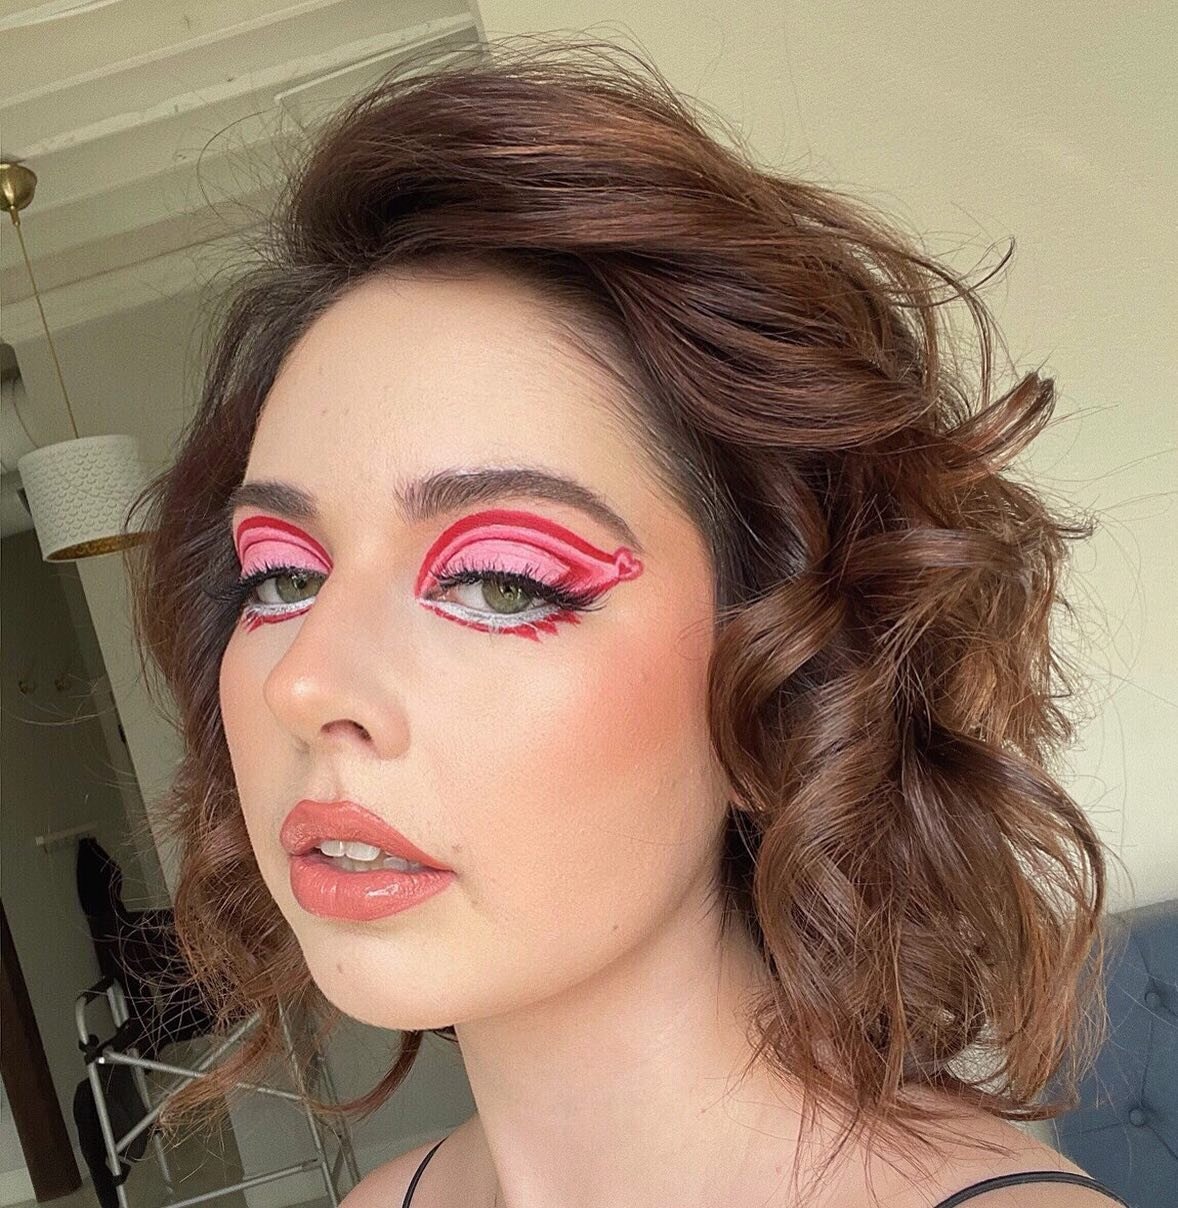 Valentine&rsquo;s Vibes❤️💗

Model - @ashley_verdebeauty 
Hair - @tina_verdebeauty 

Products used - 
Skin prep - @glowrecipe plum plump cream, watermelon dew drops 
Brows - @anastasiabeverlyhills 
Eyes - @inglot_cosmetics white liner, @verdebeauty &